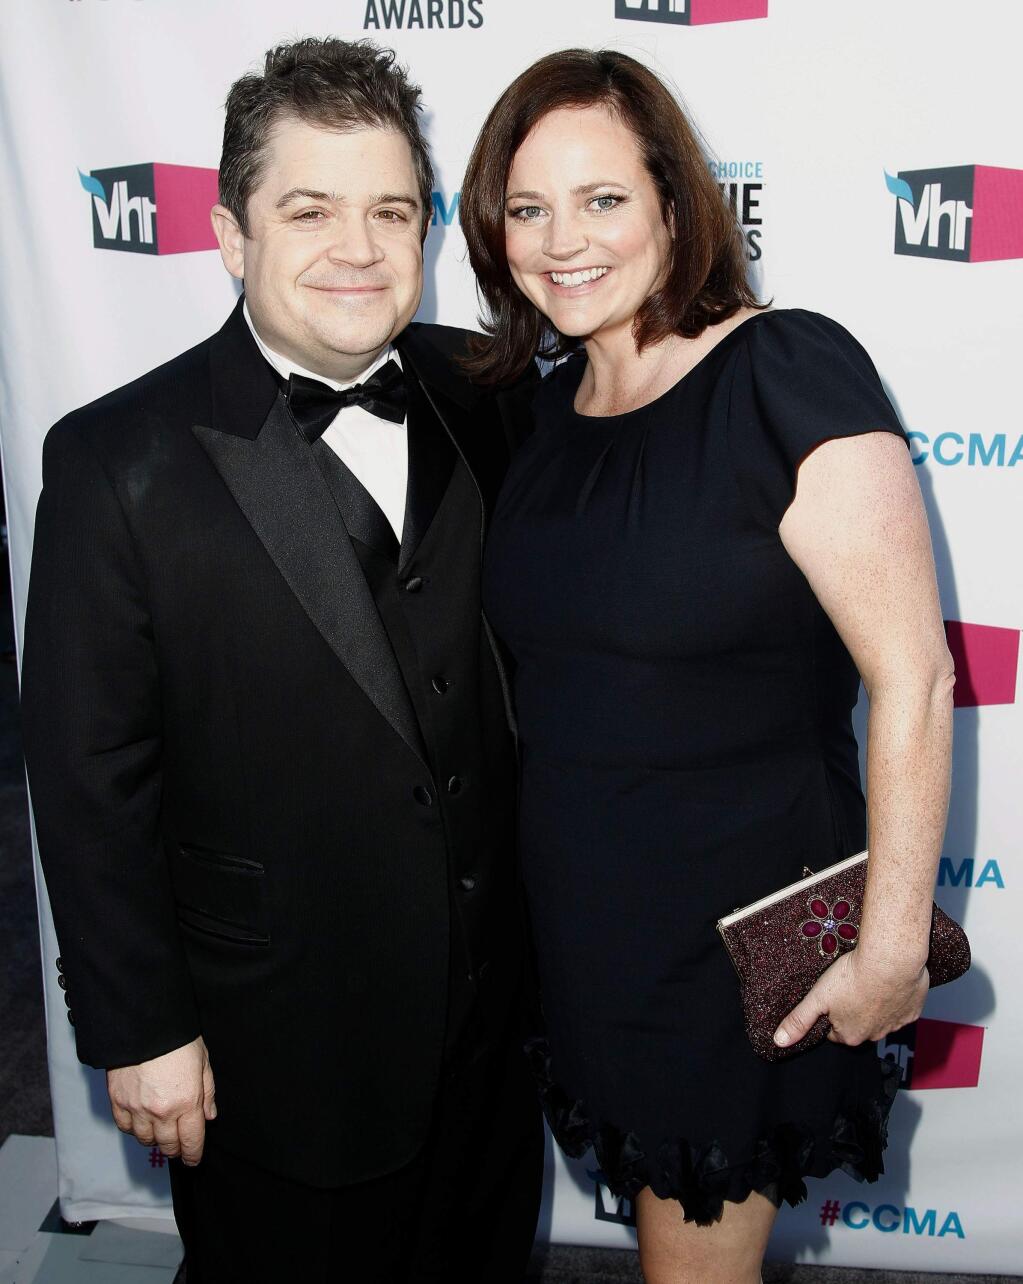 FILE - In this Jan. 12, 2012 file photo, Patton Oswalt, left, and his wife Michelle Eileen McNamara arrive at the 17th Annual Critics' Choice Movie Awards in Los Angeles. Oswalt has authored a touching essay for Time that was published on May 3, 2016, nearly two weeks after McNamara's unexpected death. (AP Photo/Matt Sayles, File)